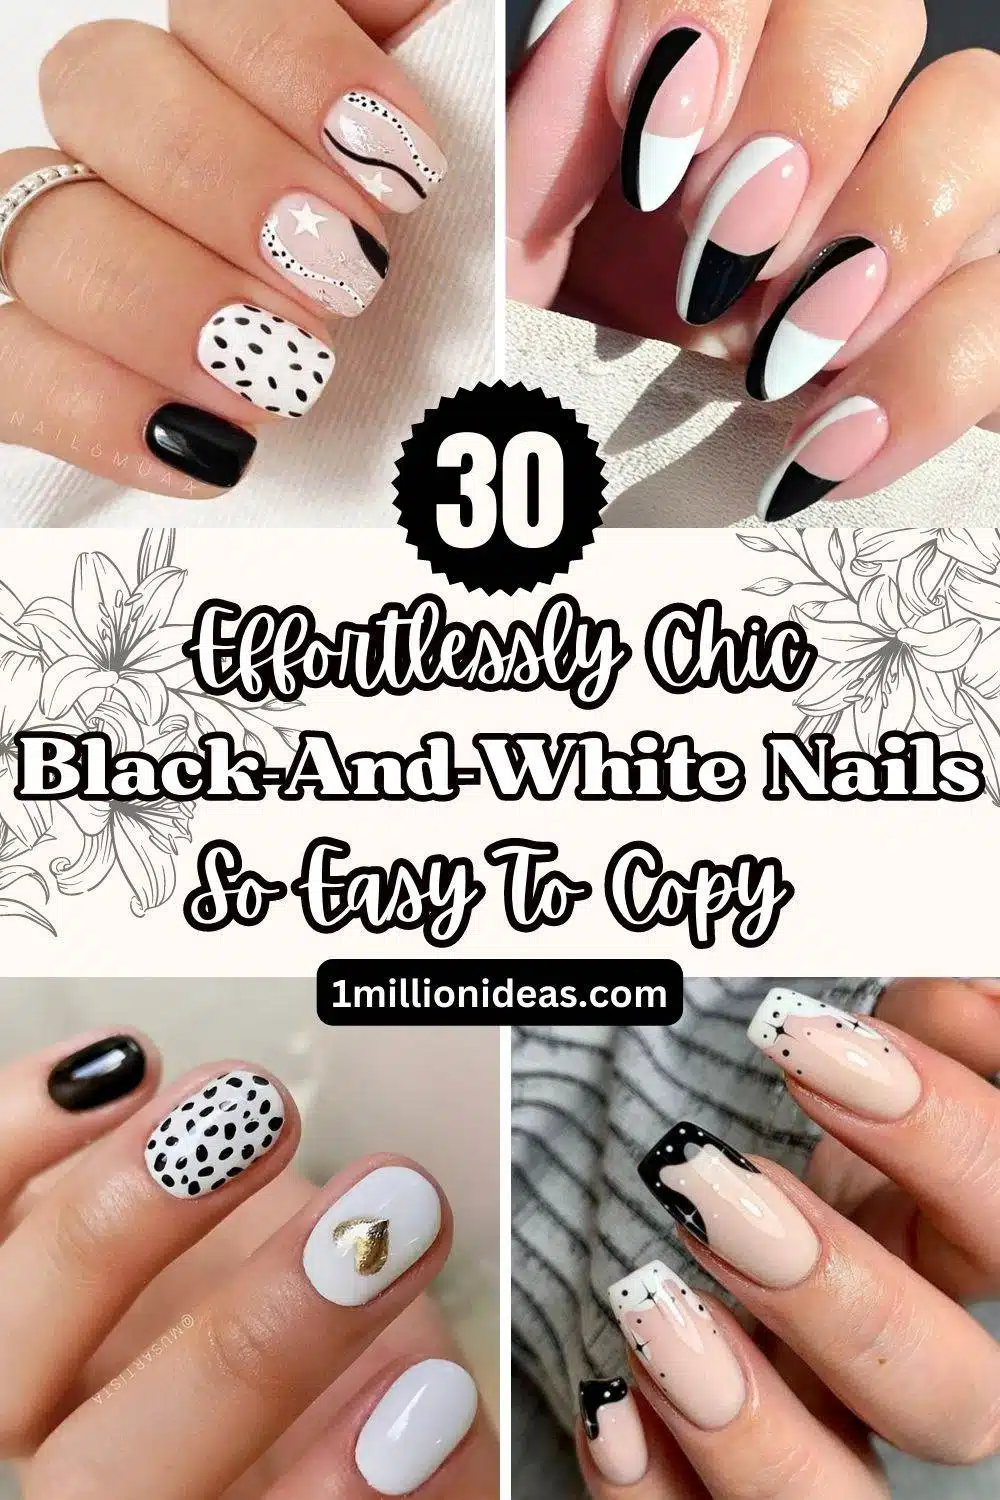 30 Effortlessly Chic Black-And-White Nail Designs So Easy To Copy - 191